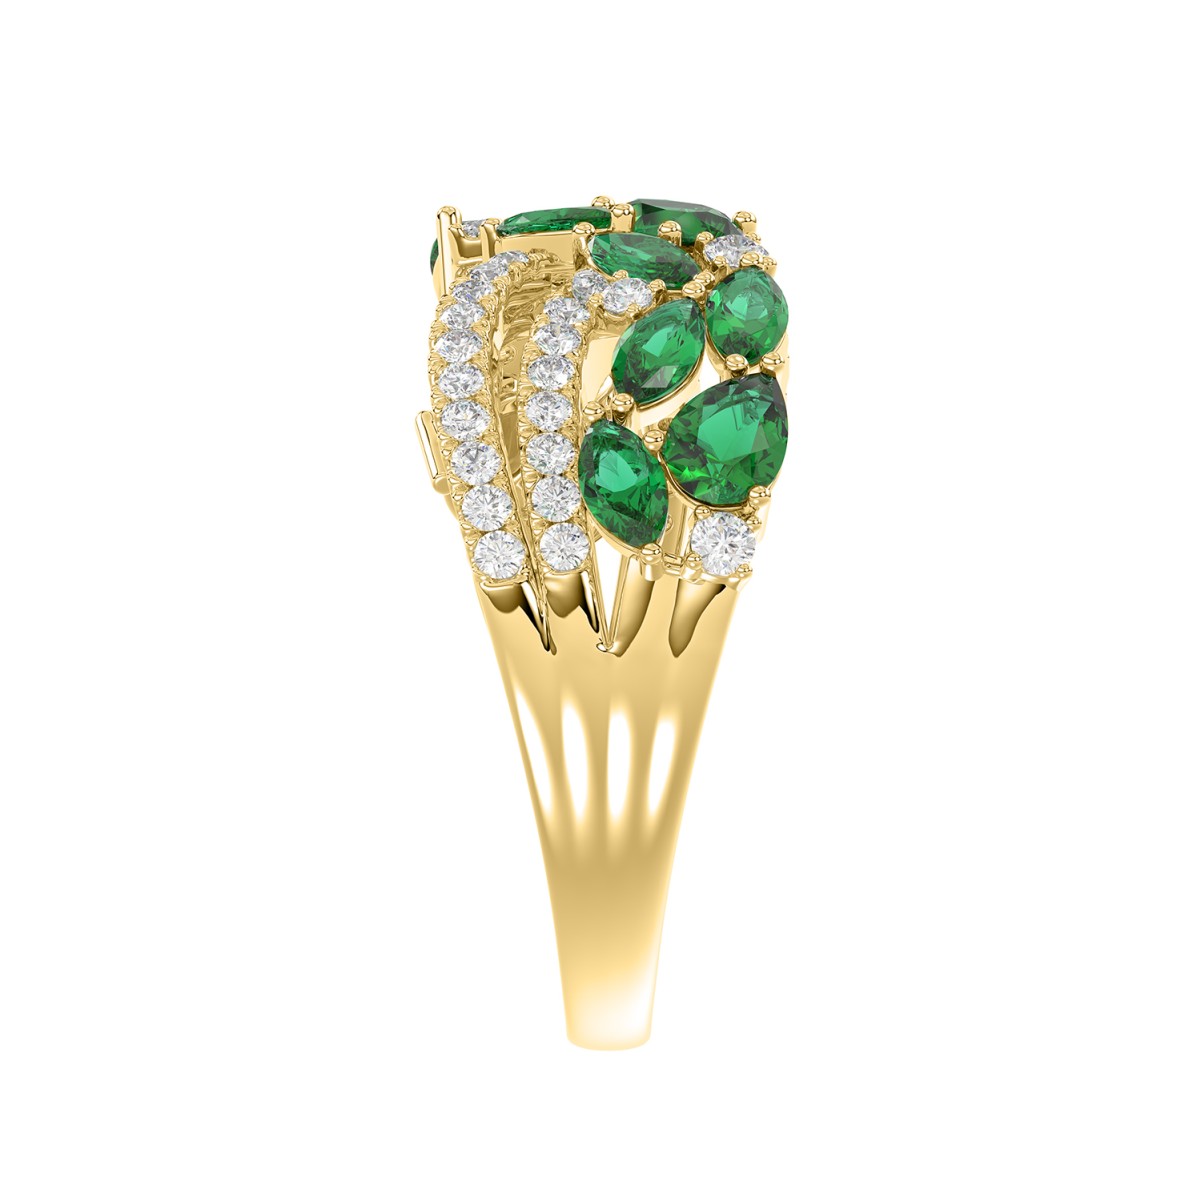 14K YELLOW GOLD 1/3CT ROUND/MARQUISE/PEAR DIAMOND LADIES FASHION RING( COLOR STONE MARQUISE GREEN EMERALD DIAMOND/PEAR 1.45CT/ 12 STONE)